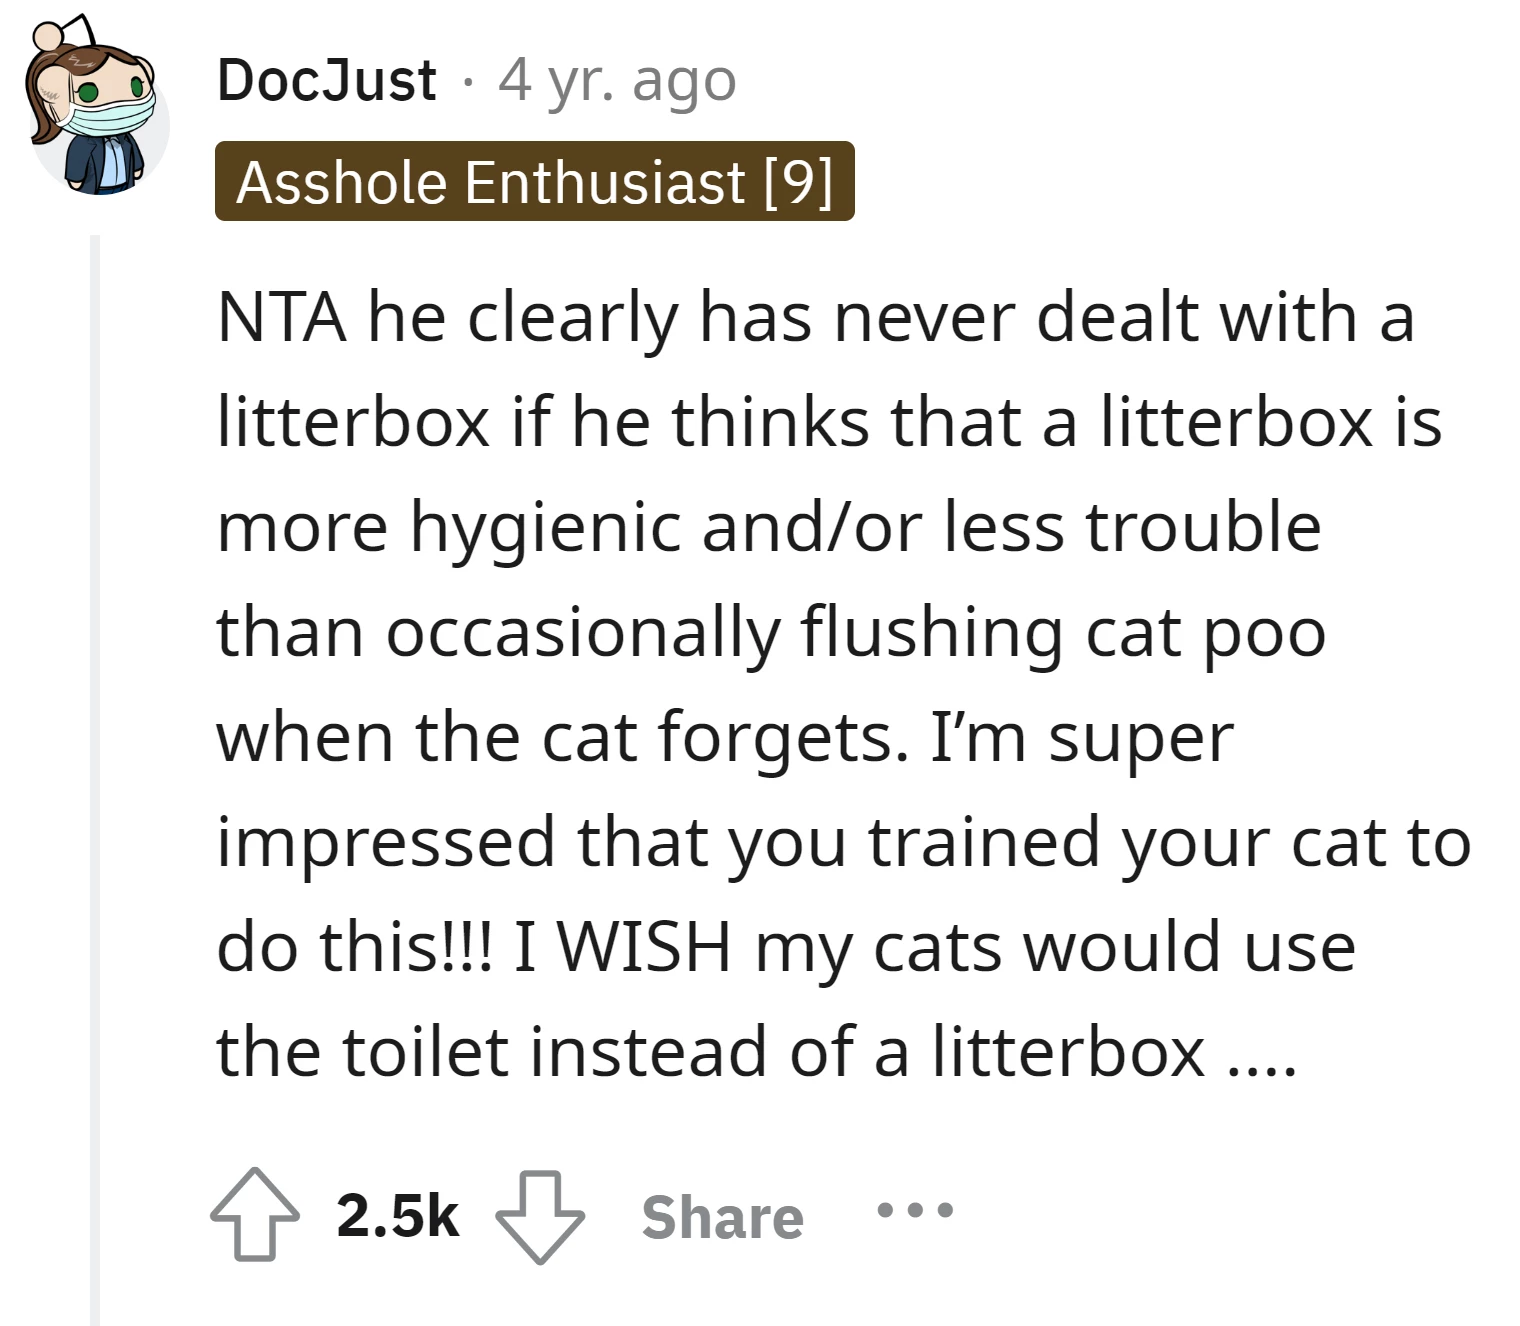 Commenter states that the boyfriend lacks experience with litter boxes